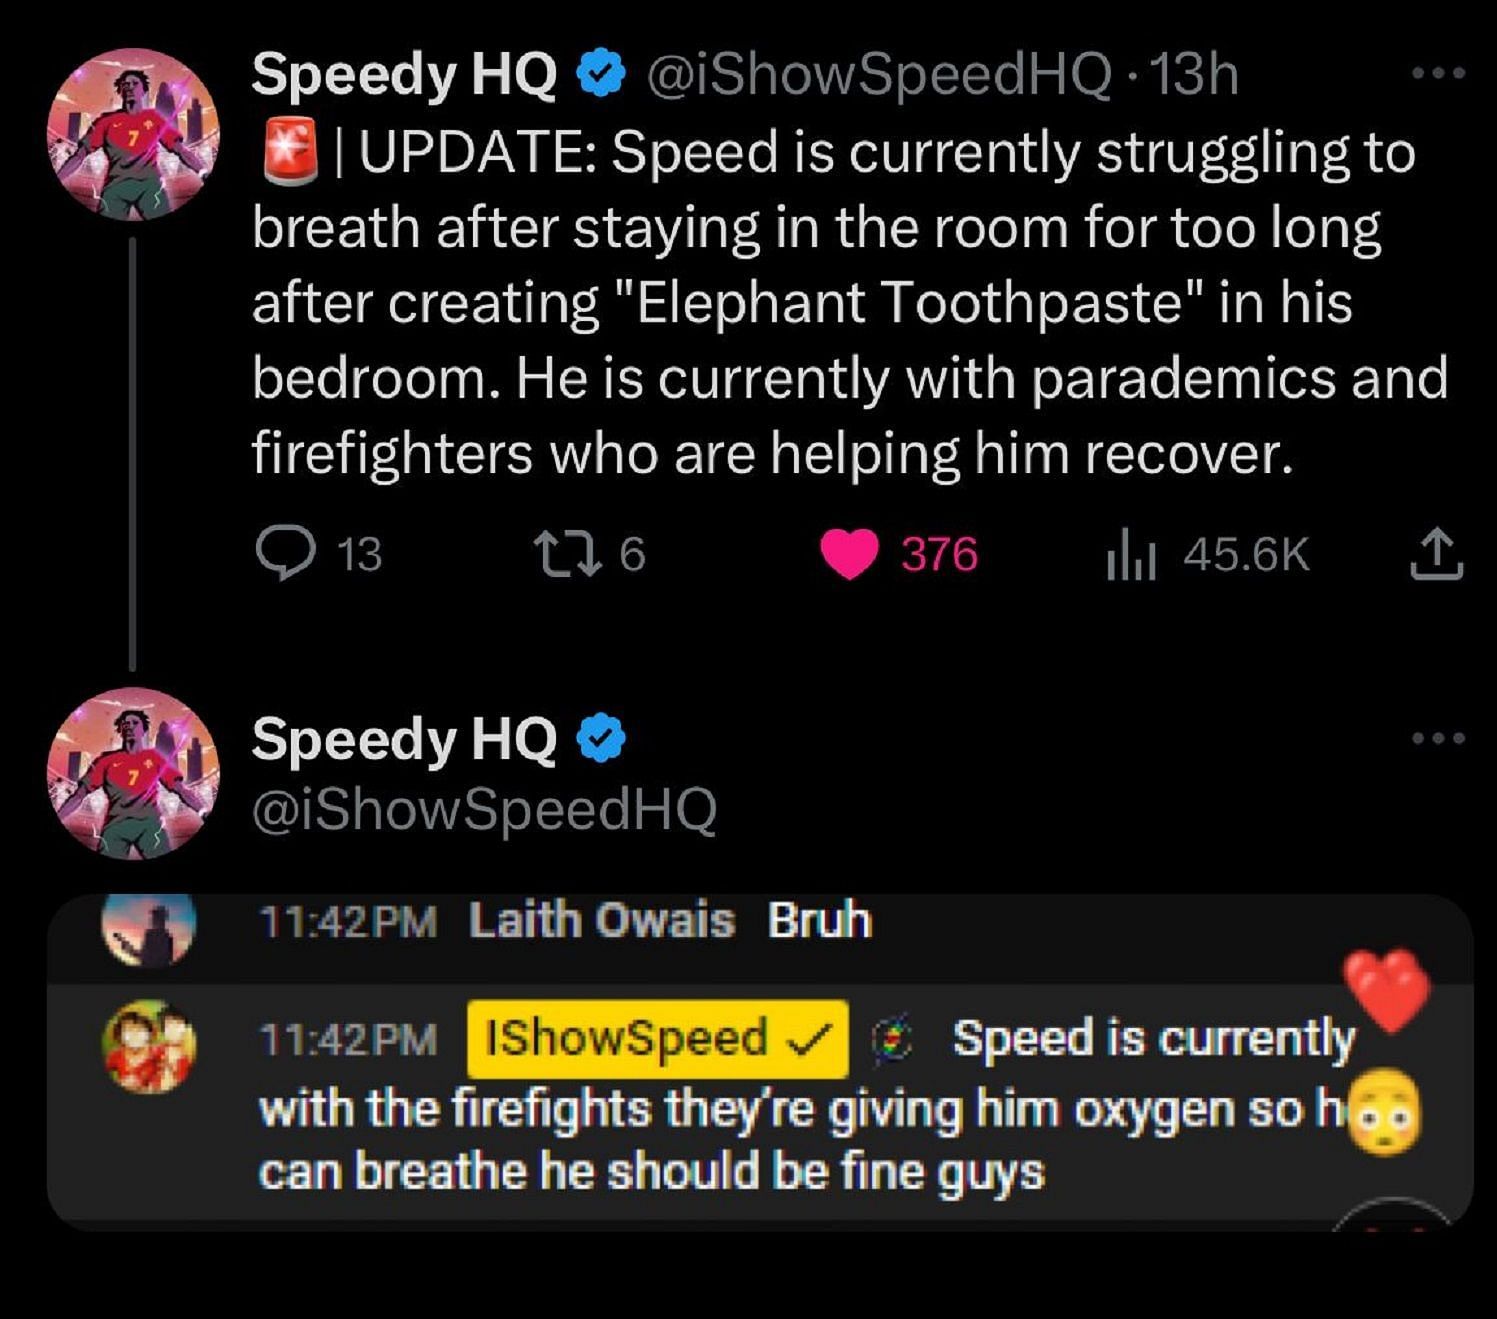 What happened to IShowSpeed? Streamer needed paramedic help after Elephant  Toothpaste experiment went wrong